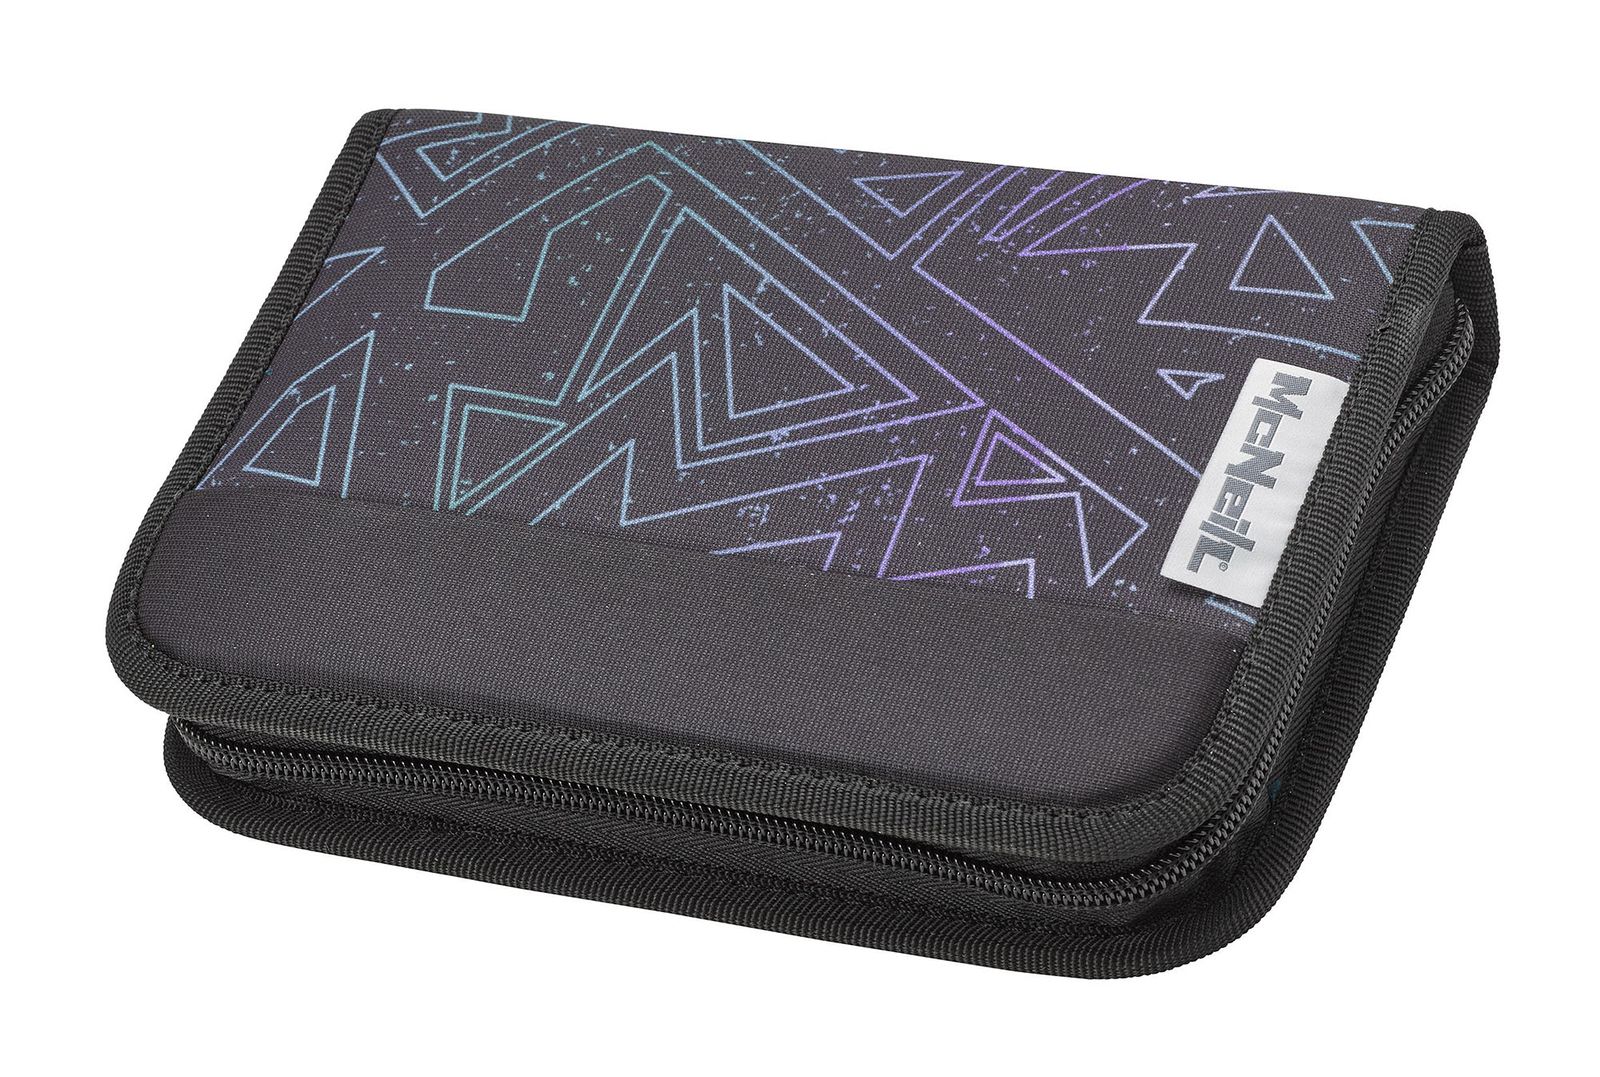 modeherz McNeill Pens accessories Case Tron | pencil bags, with | & purses Pencil Buy online case